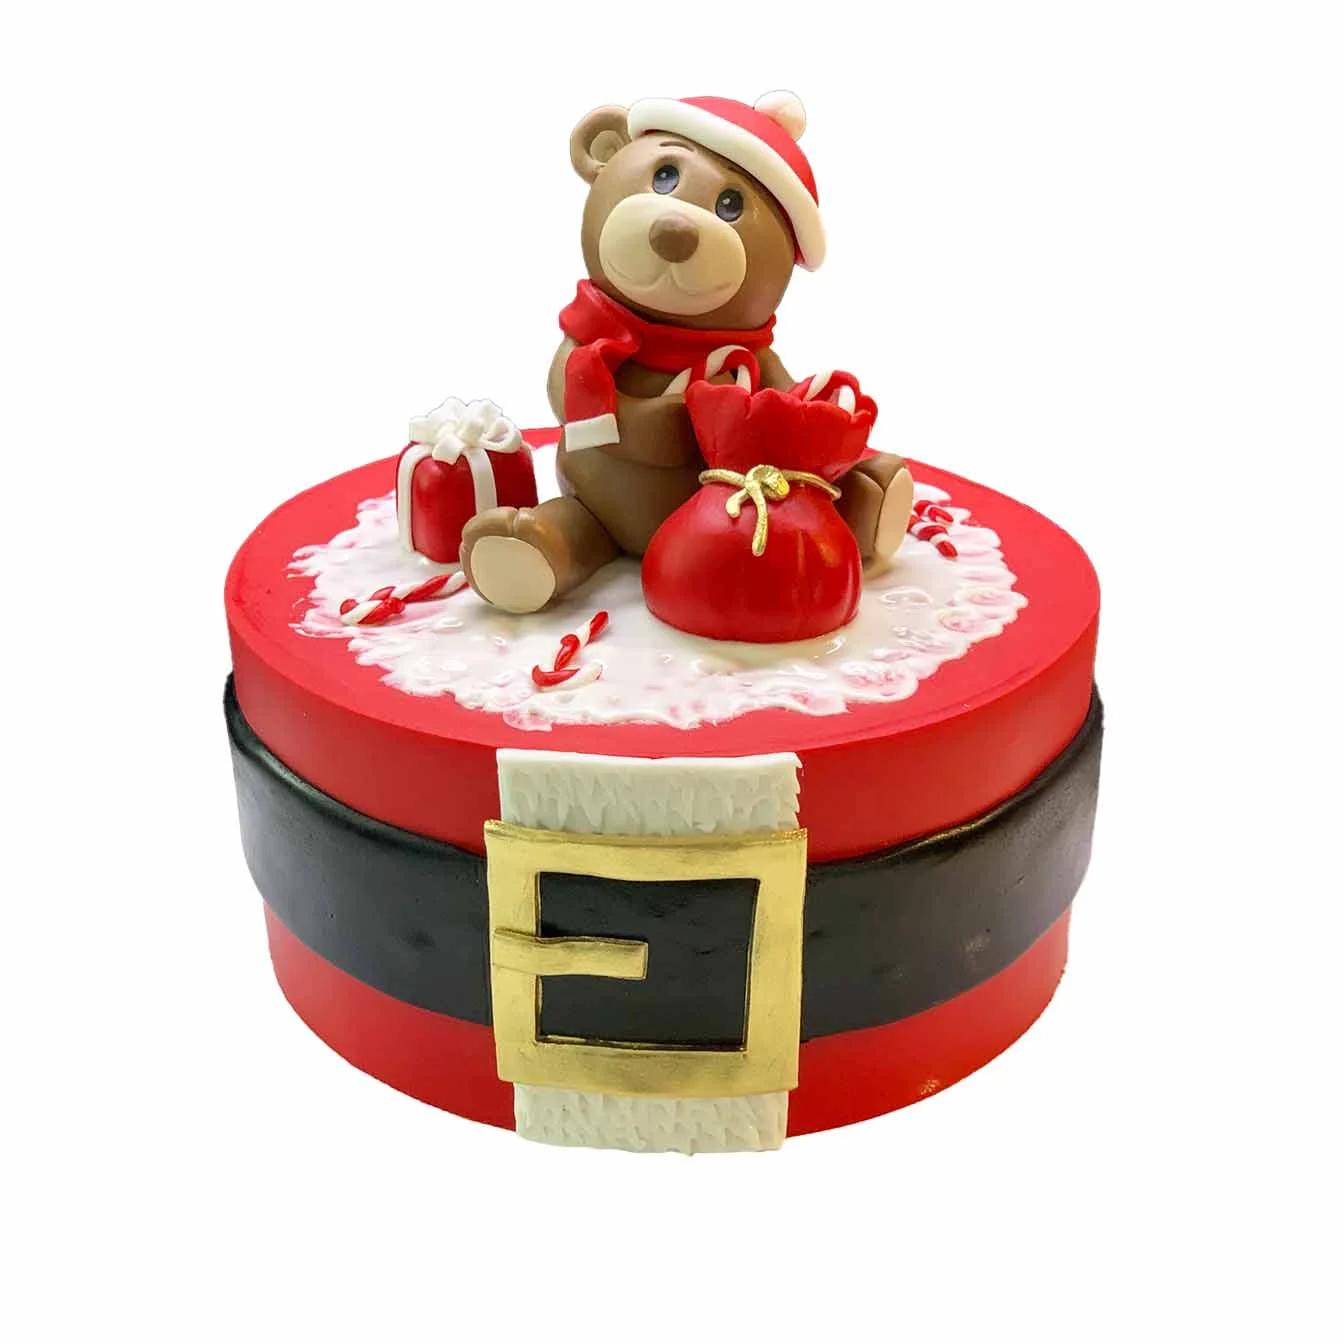 Santa's Teddy Bear Christmas Cake - A red fondant-iced cake with a Santa belt, a moulded teddy bear wearing a Santa hat, surrounded by Santa's sack and presents, a delightful centerpiece for festive Christmas celebrations.